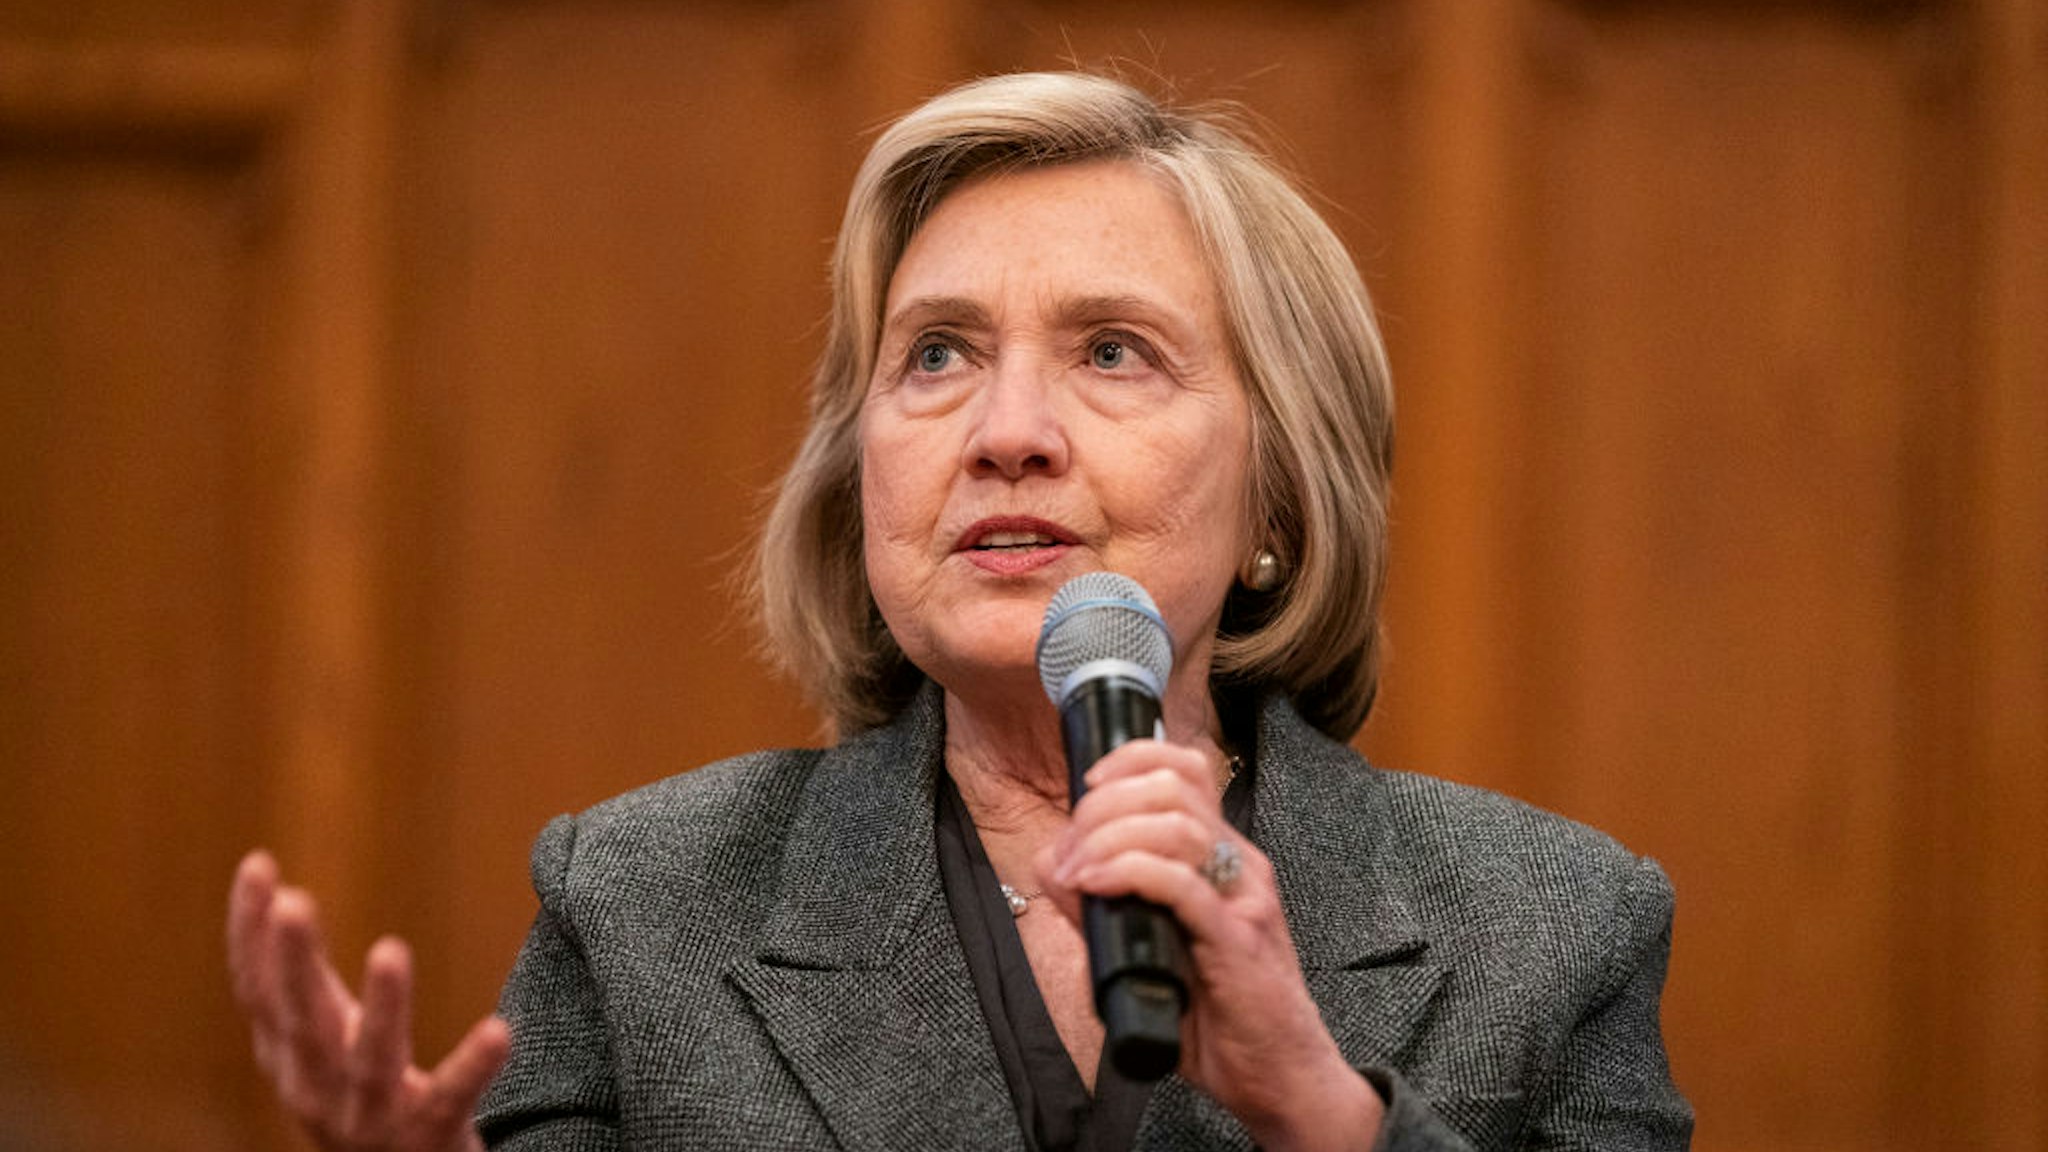 Hillary Clinton spoke during a book event promoting her new book